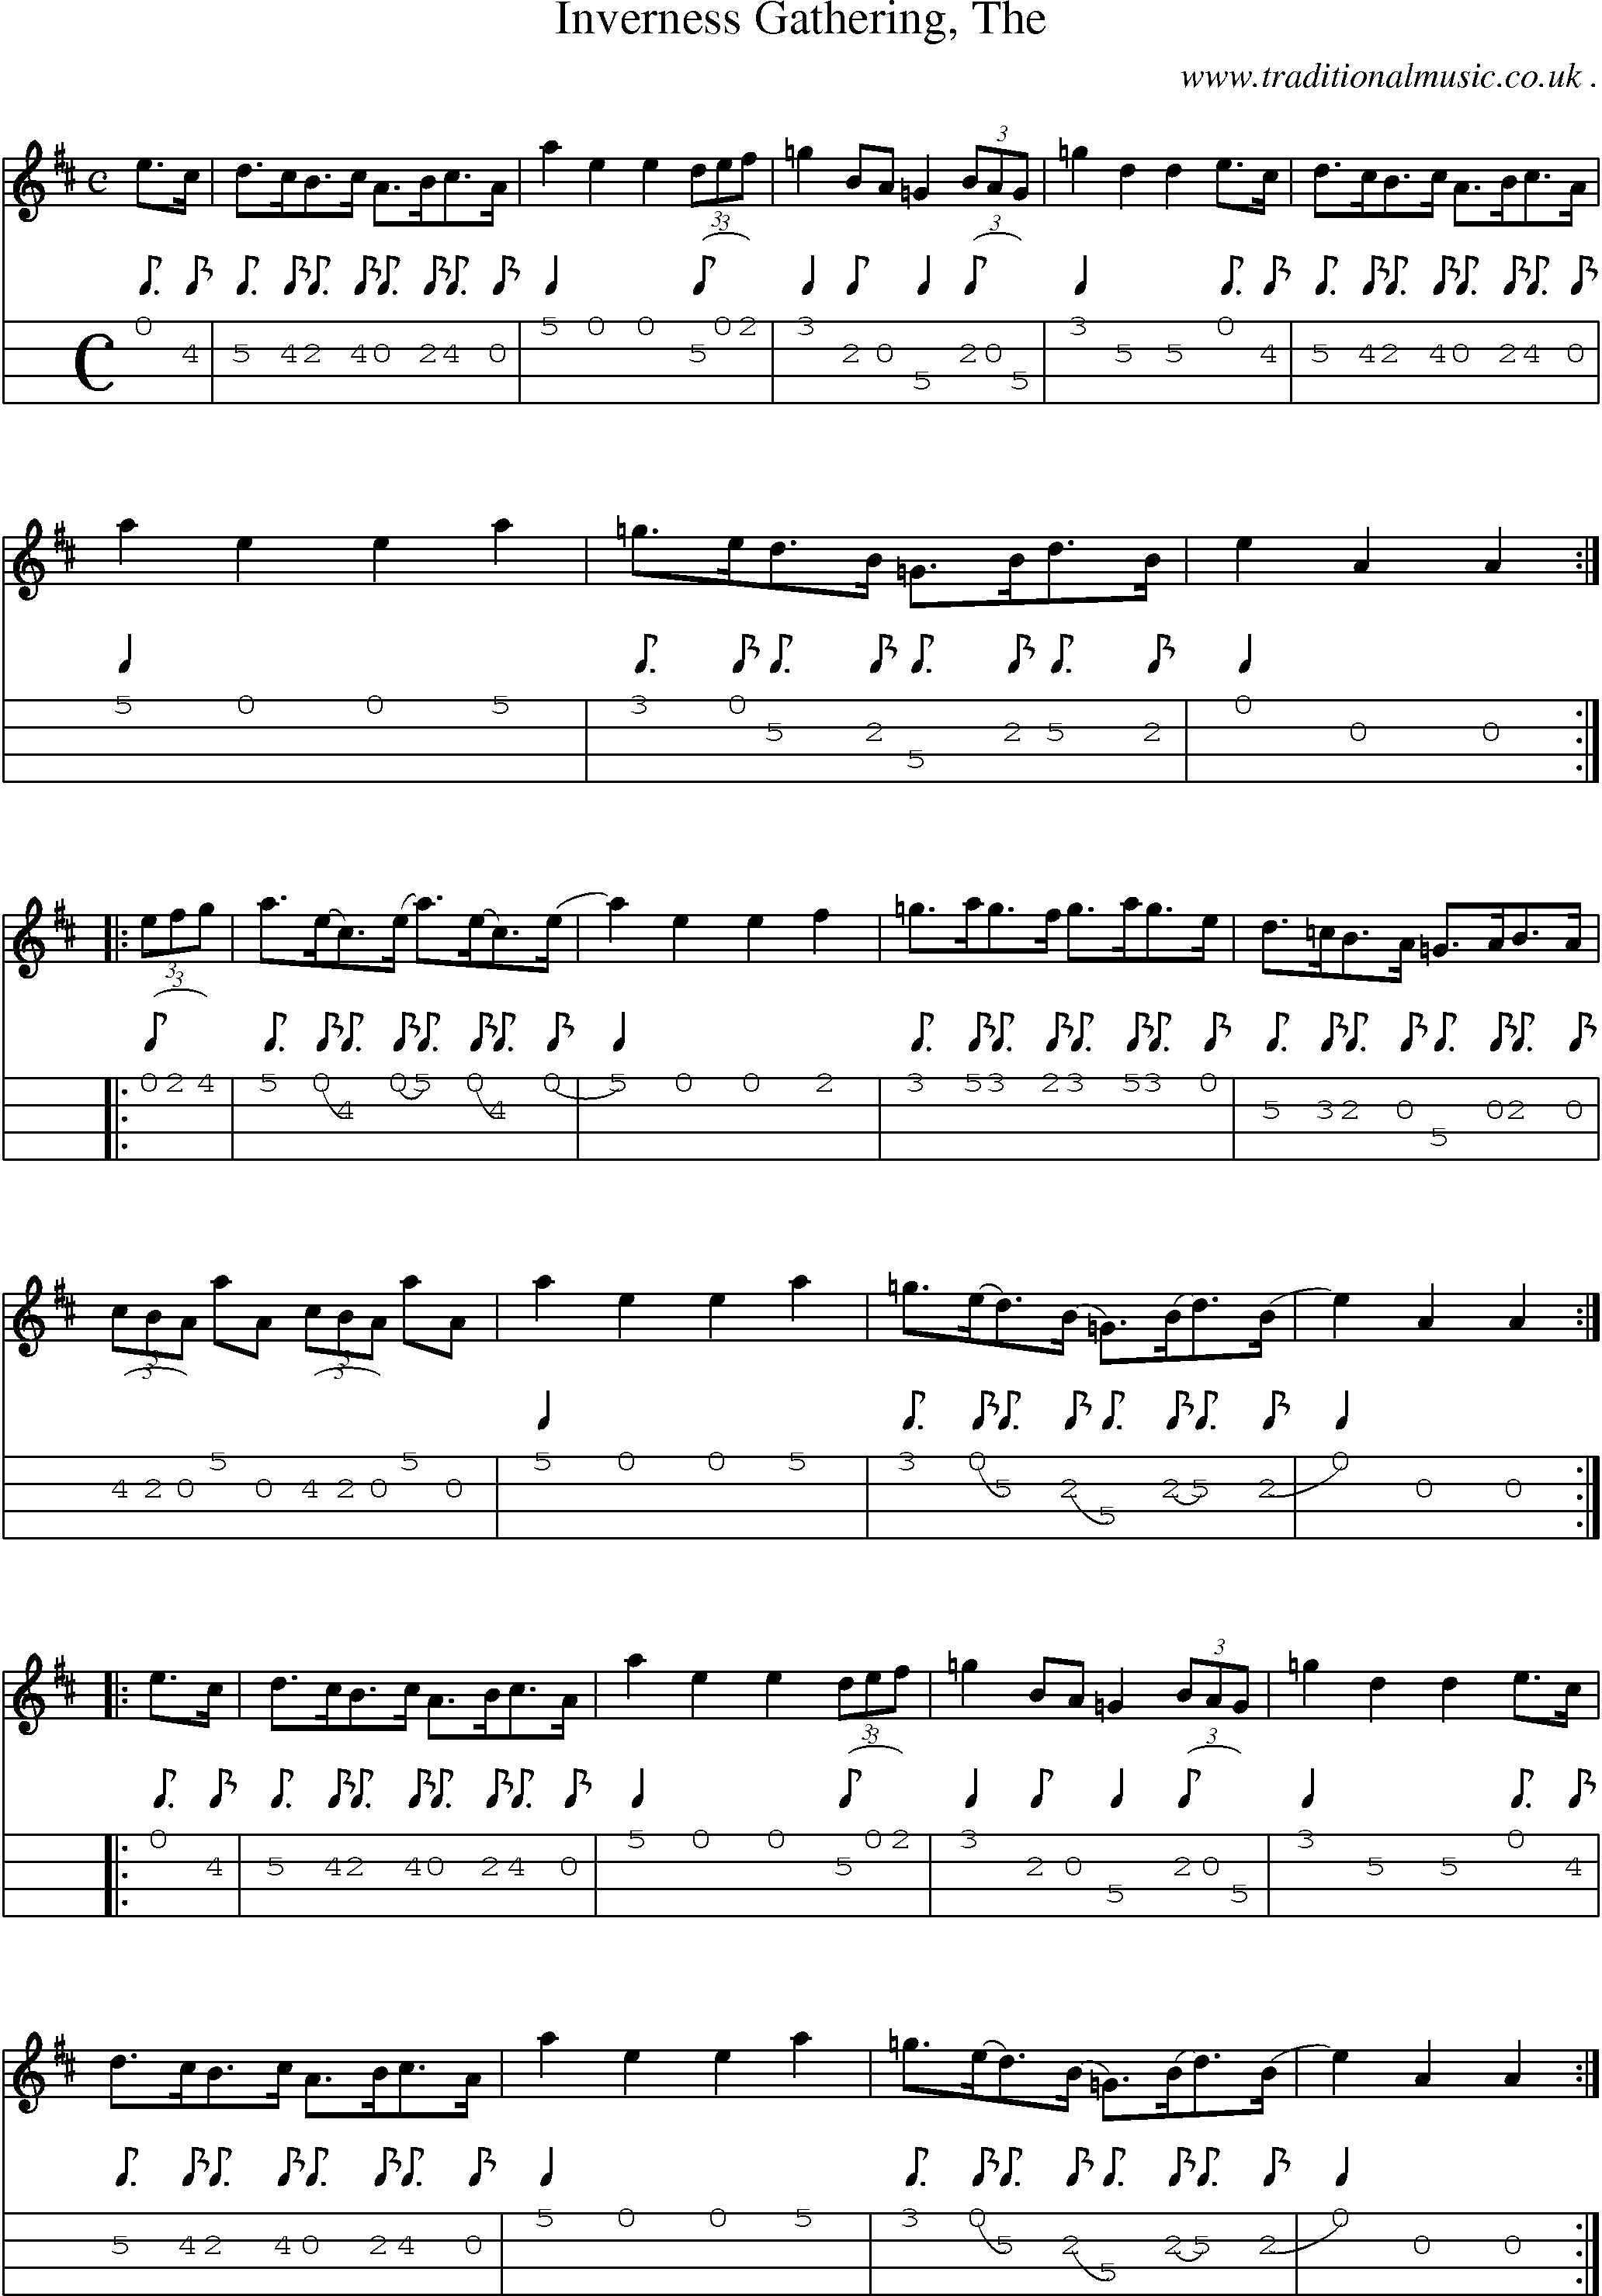 Sheet-music  score, Chords and Mandolin Tabs for Inverness Gathering The